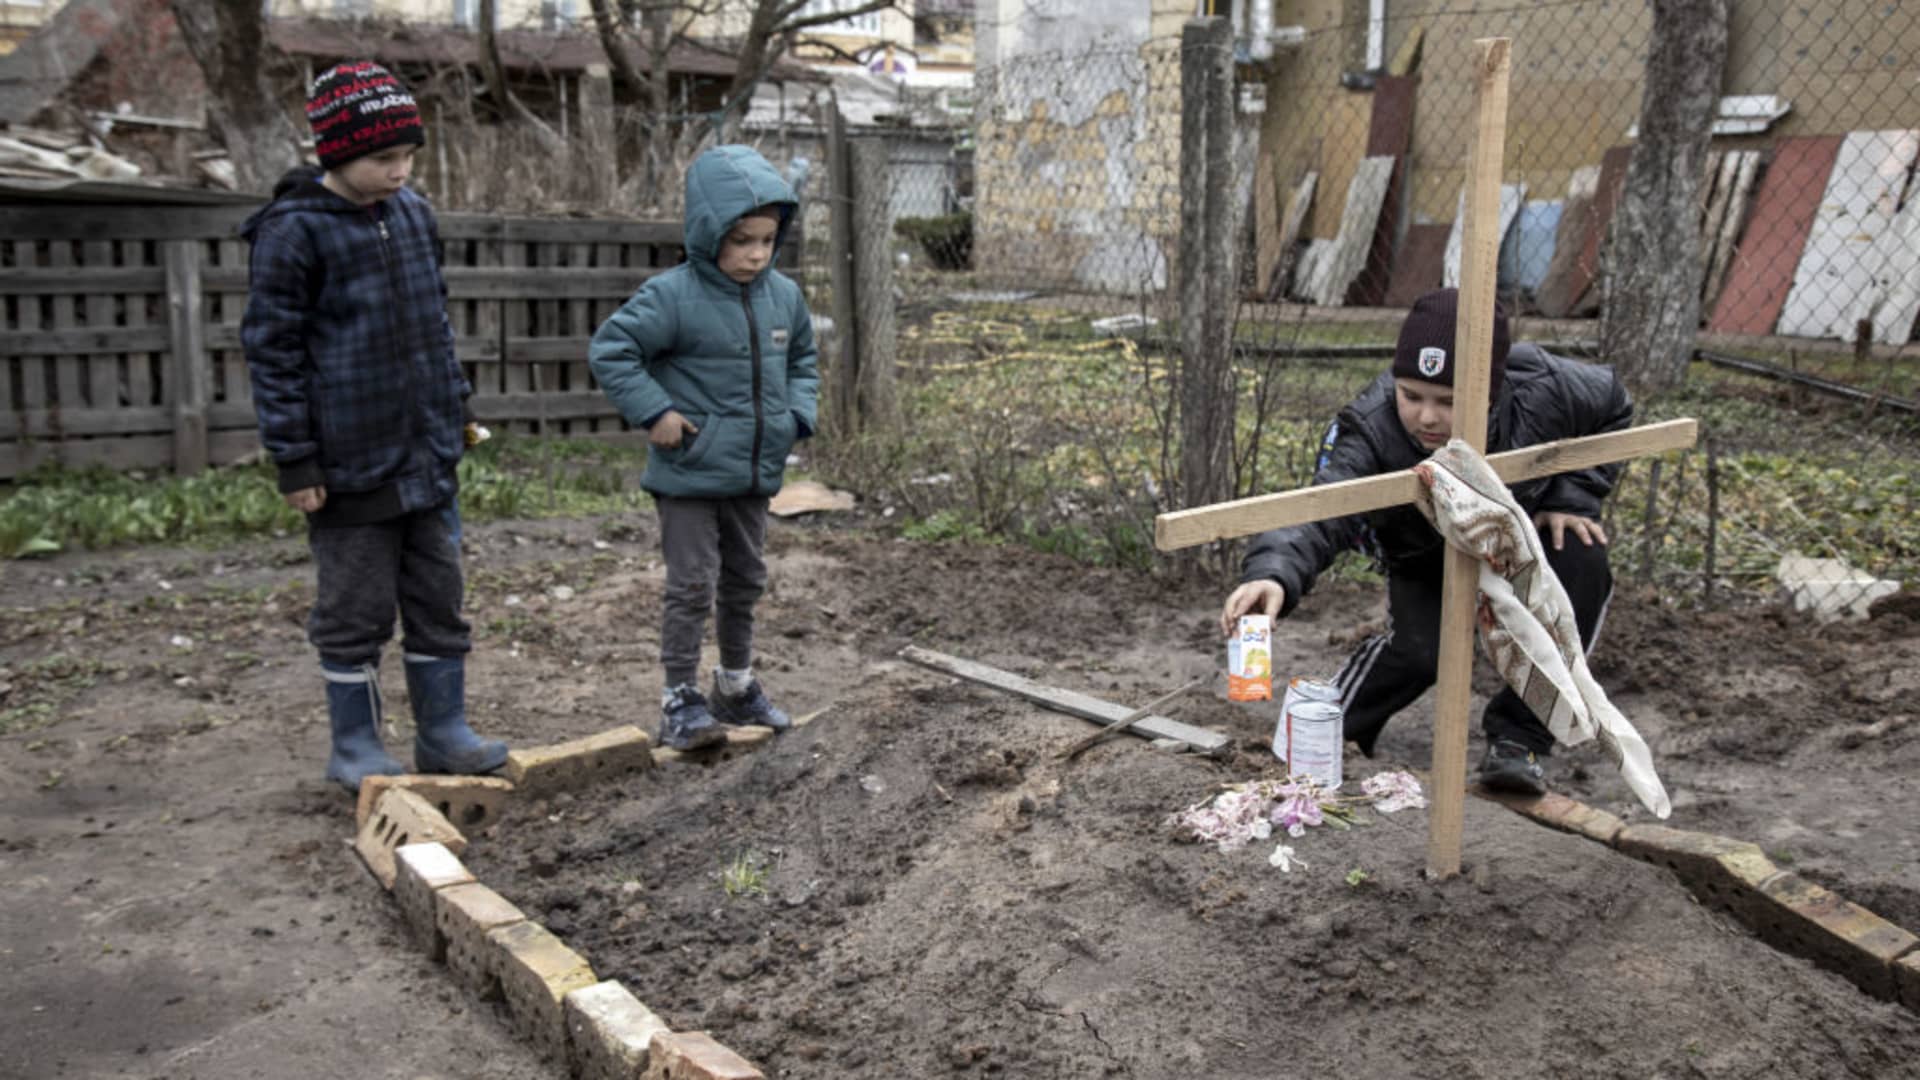 A young boy gives an offering of food to his mother's grave as his younger brother and a neighbor stand next to it, in the town of Bucha, on the outskirts of Kyiv, after the Ukrainian army secured the area following the withdrawal of the Russian army from the Kyiv region on previous days, Bucha, Ukraine, April 4th, 2022.